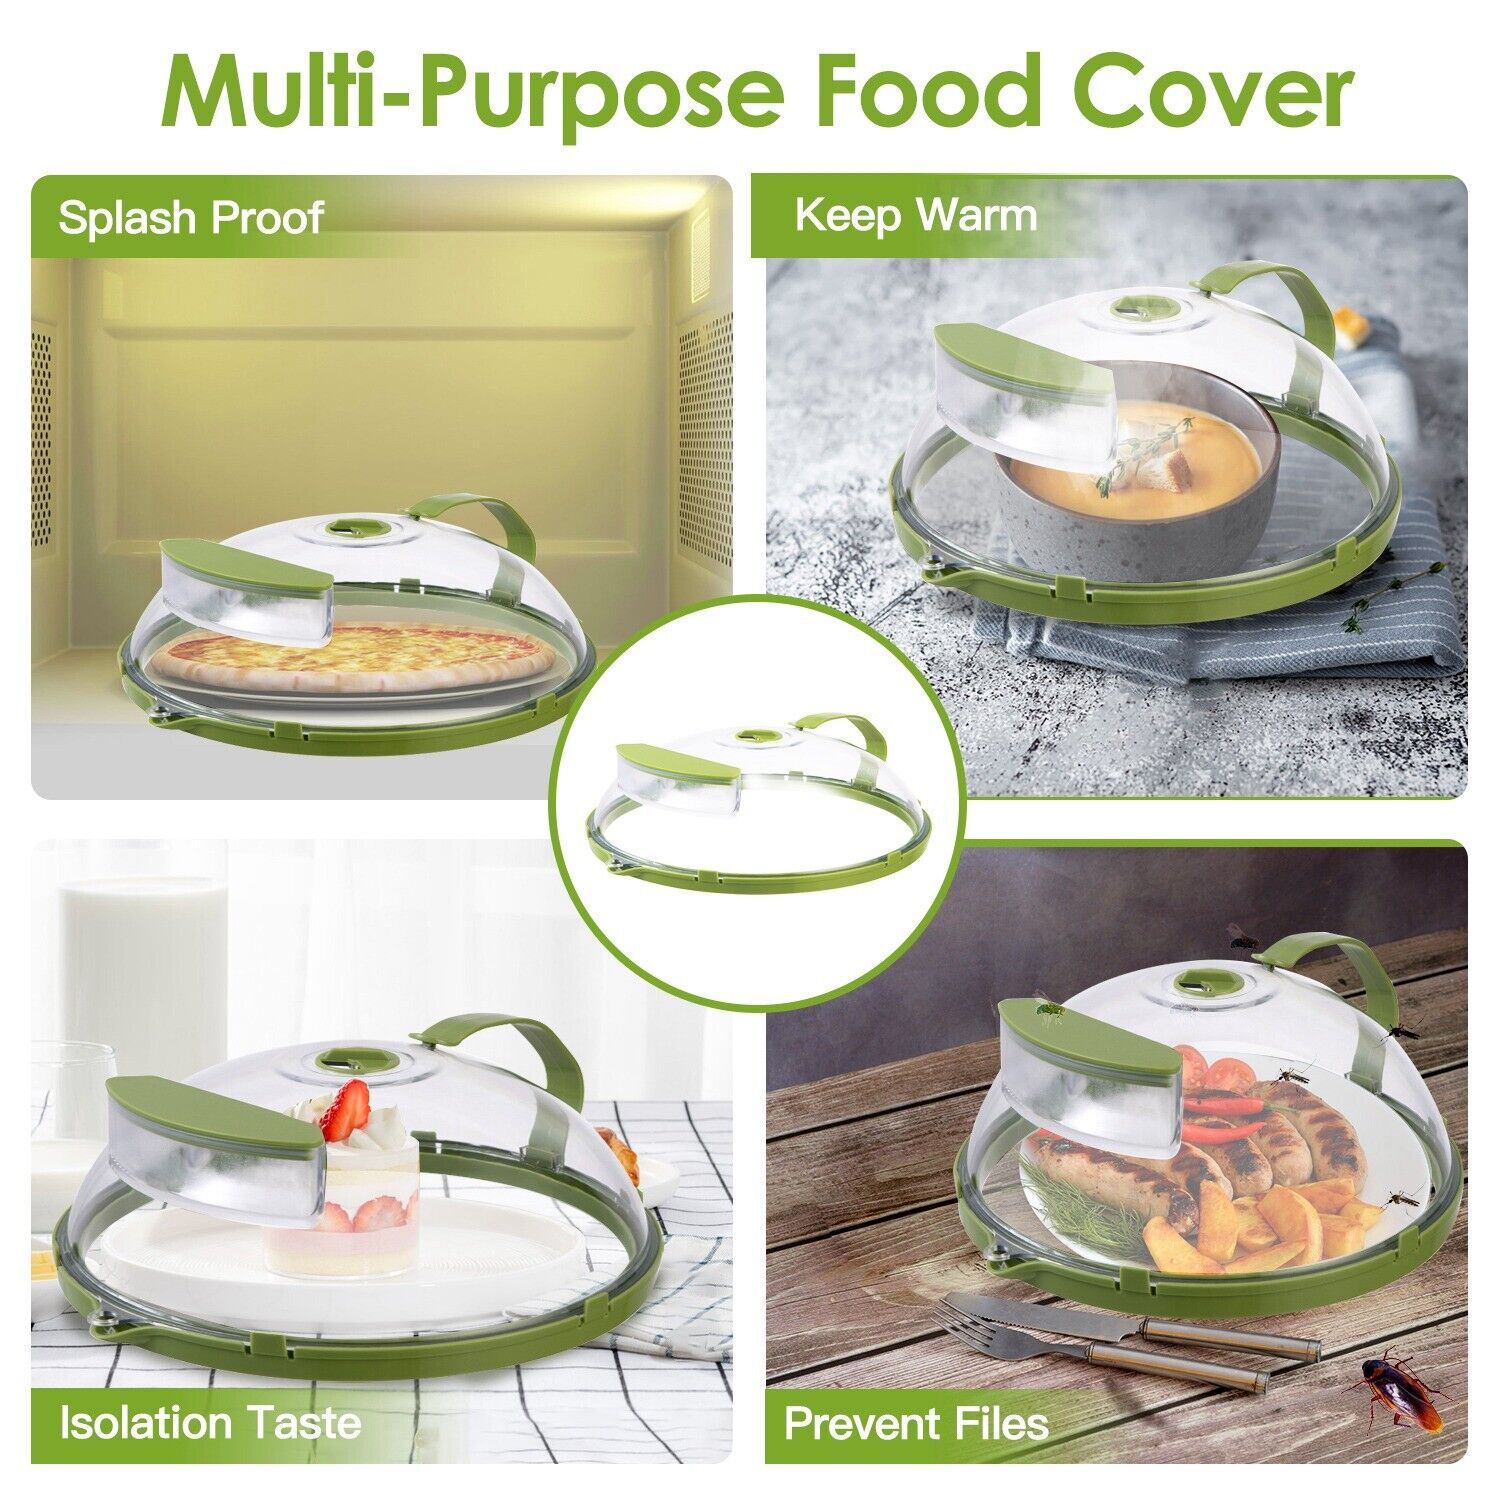 2Pcs Microwave Food Cover Splatter Proof Vented With Easy Grip Hand Protector- Heavy Duty